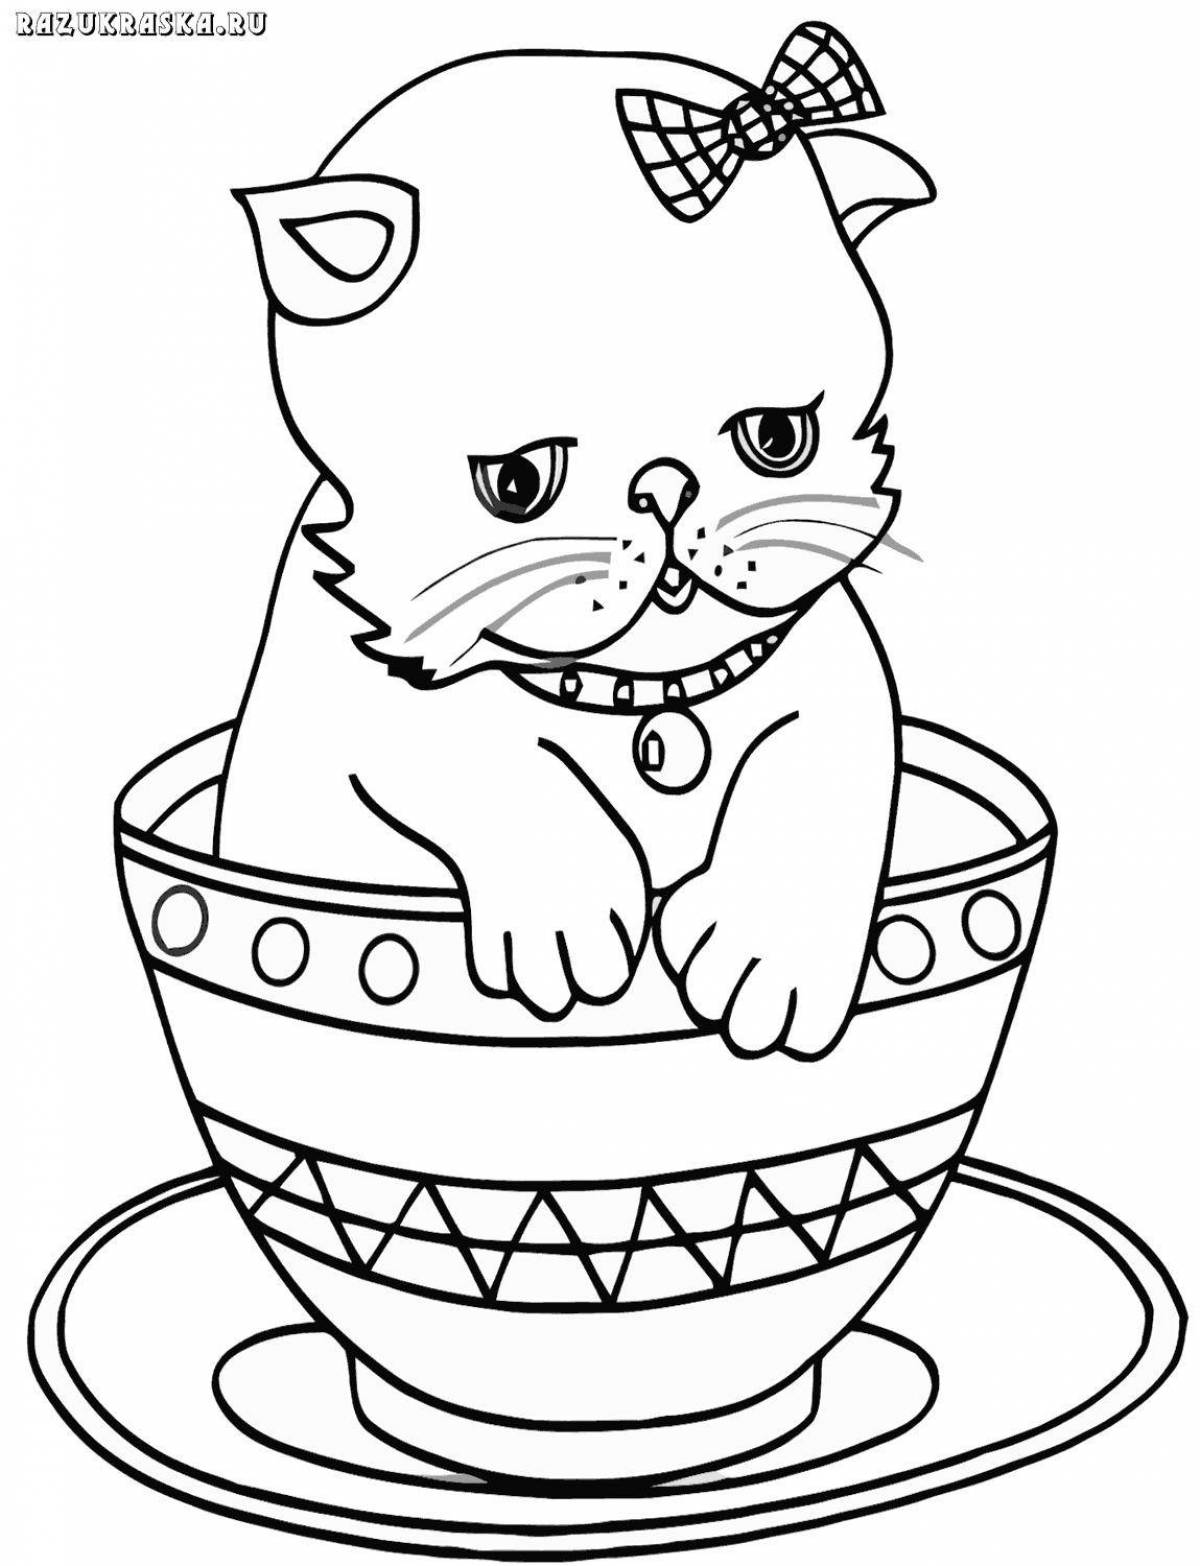 Coloring page adorable cat in a mug